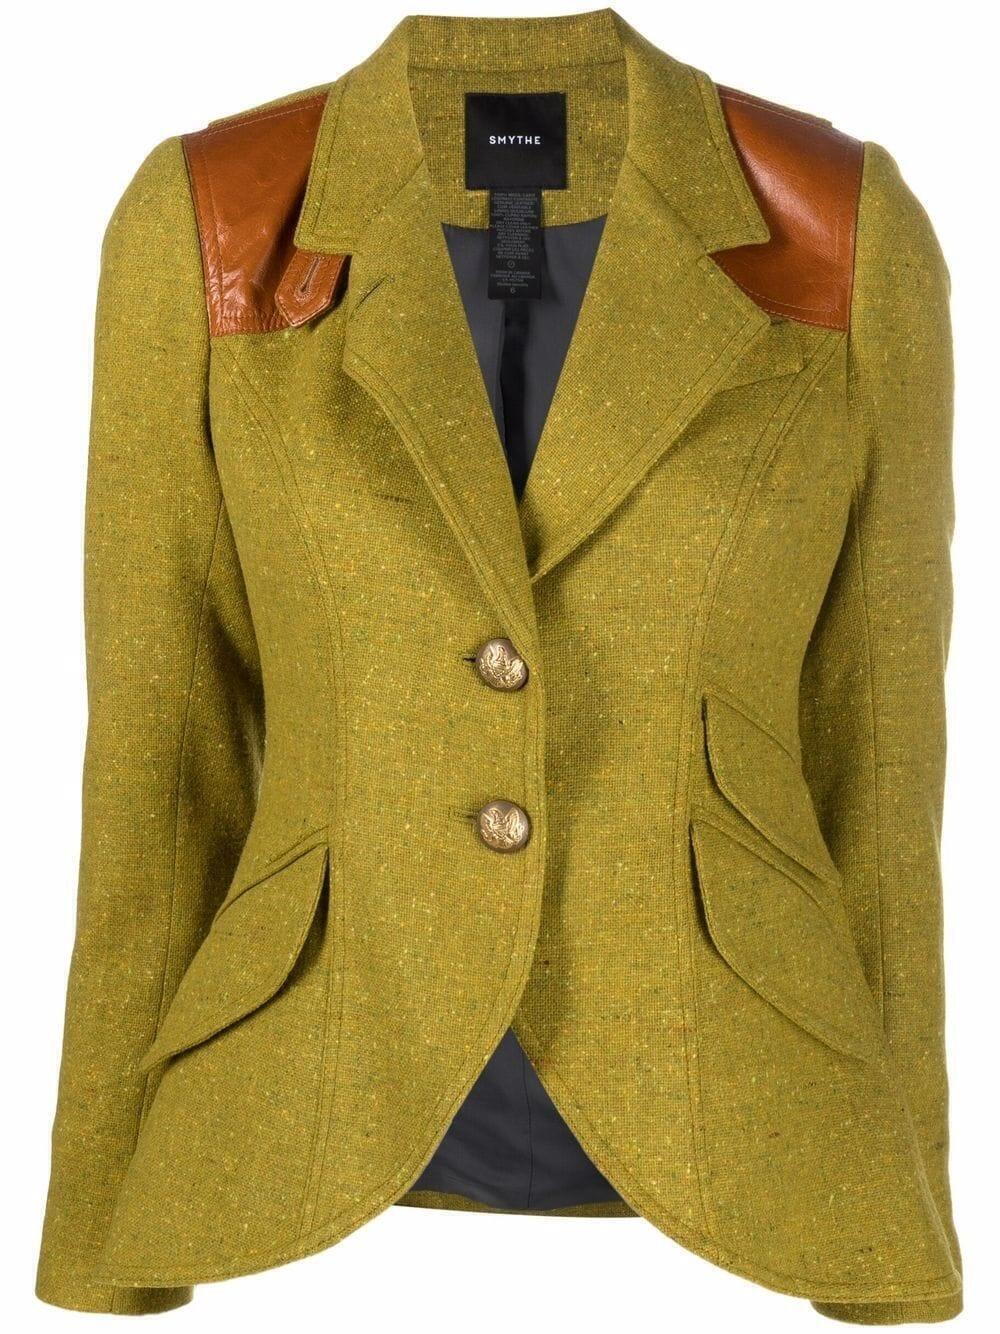 smythe huntingblazer chartreuse donegal whiskey leather